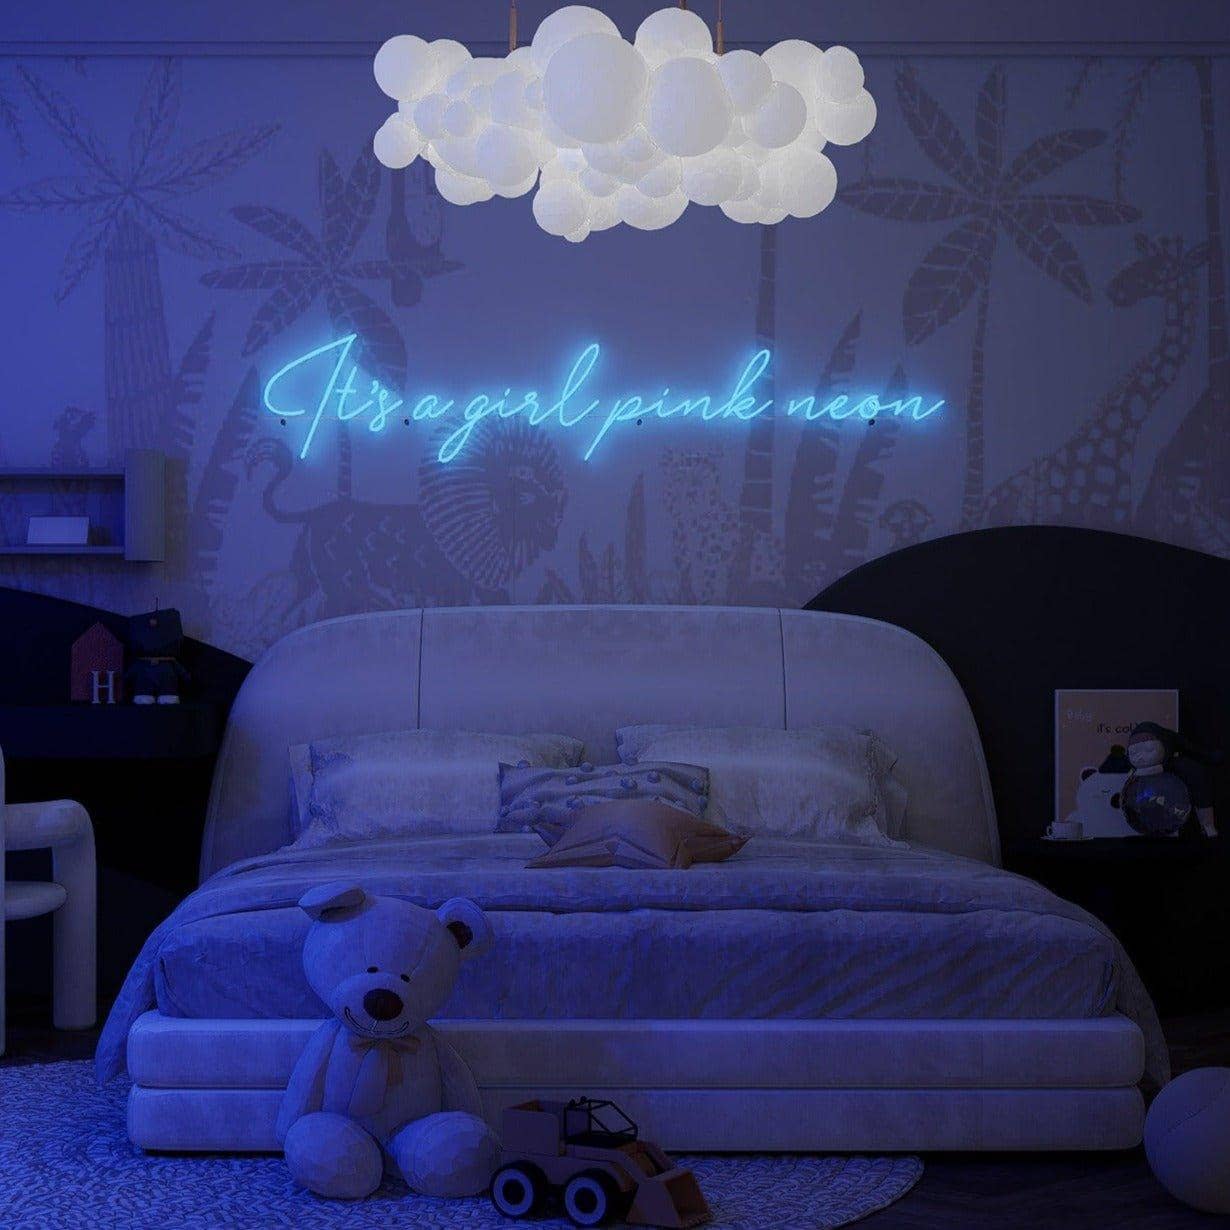 light-up-blue-neon-lights-hanging-on-the-wall-for-display-at-night-it's-a-girl-pink-neon